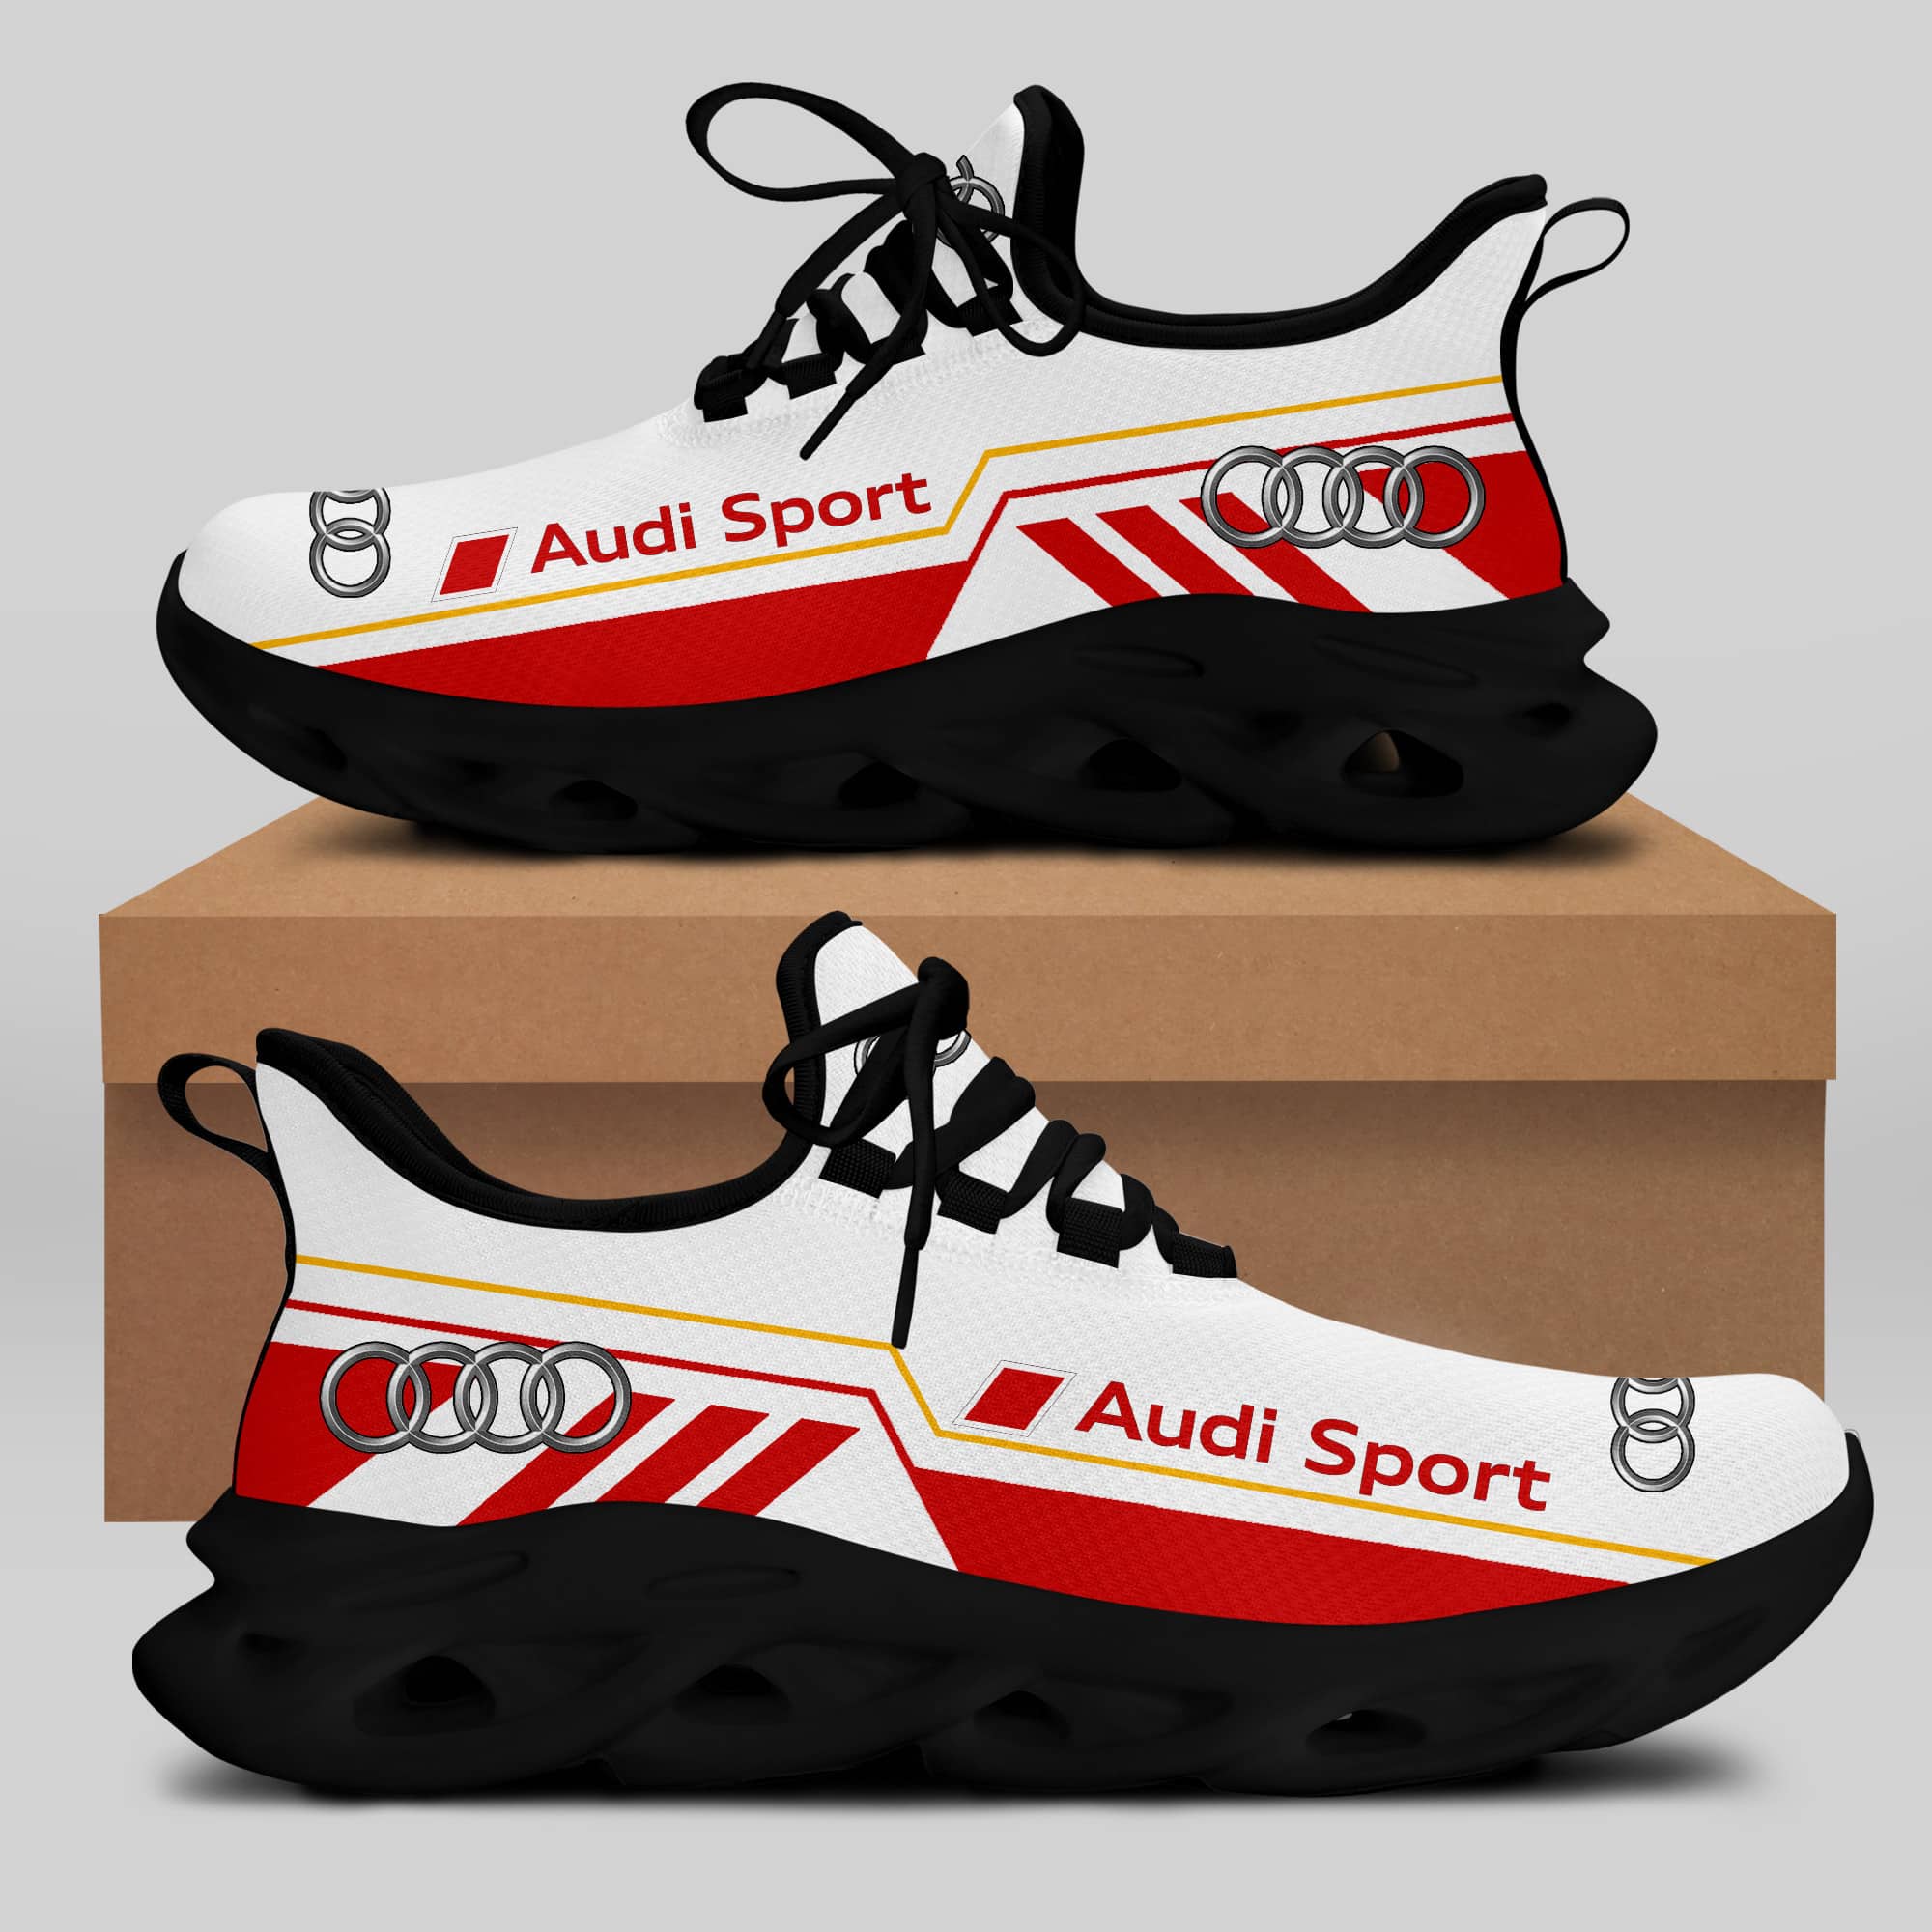 Audi Sport Running Shoes Max Soul Shoes Sneakers Ver 18 2